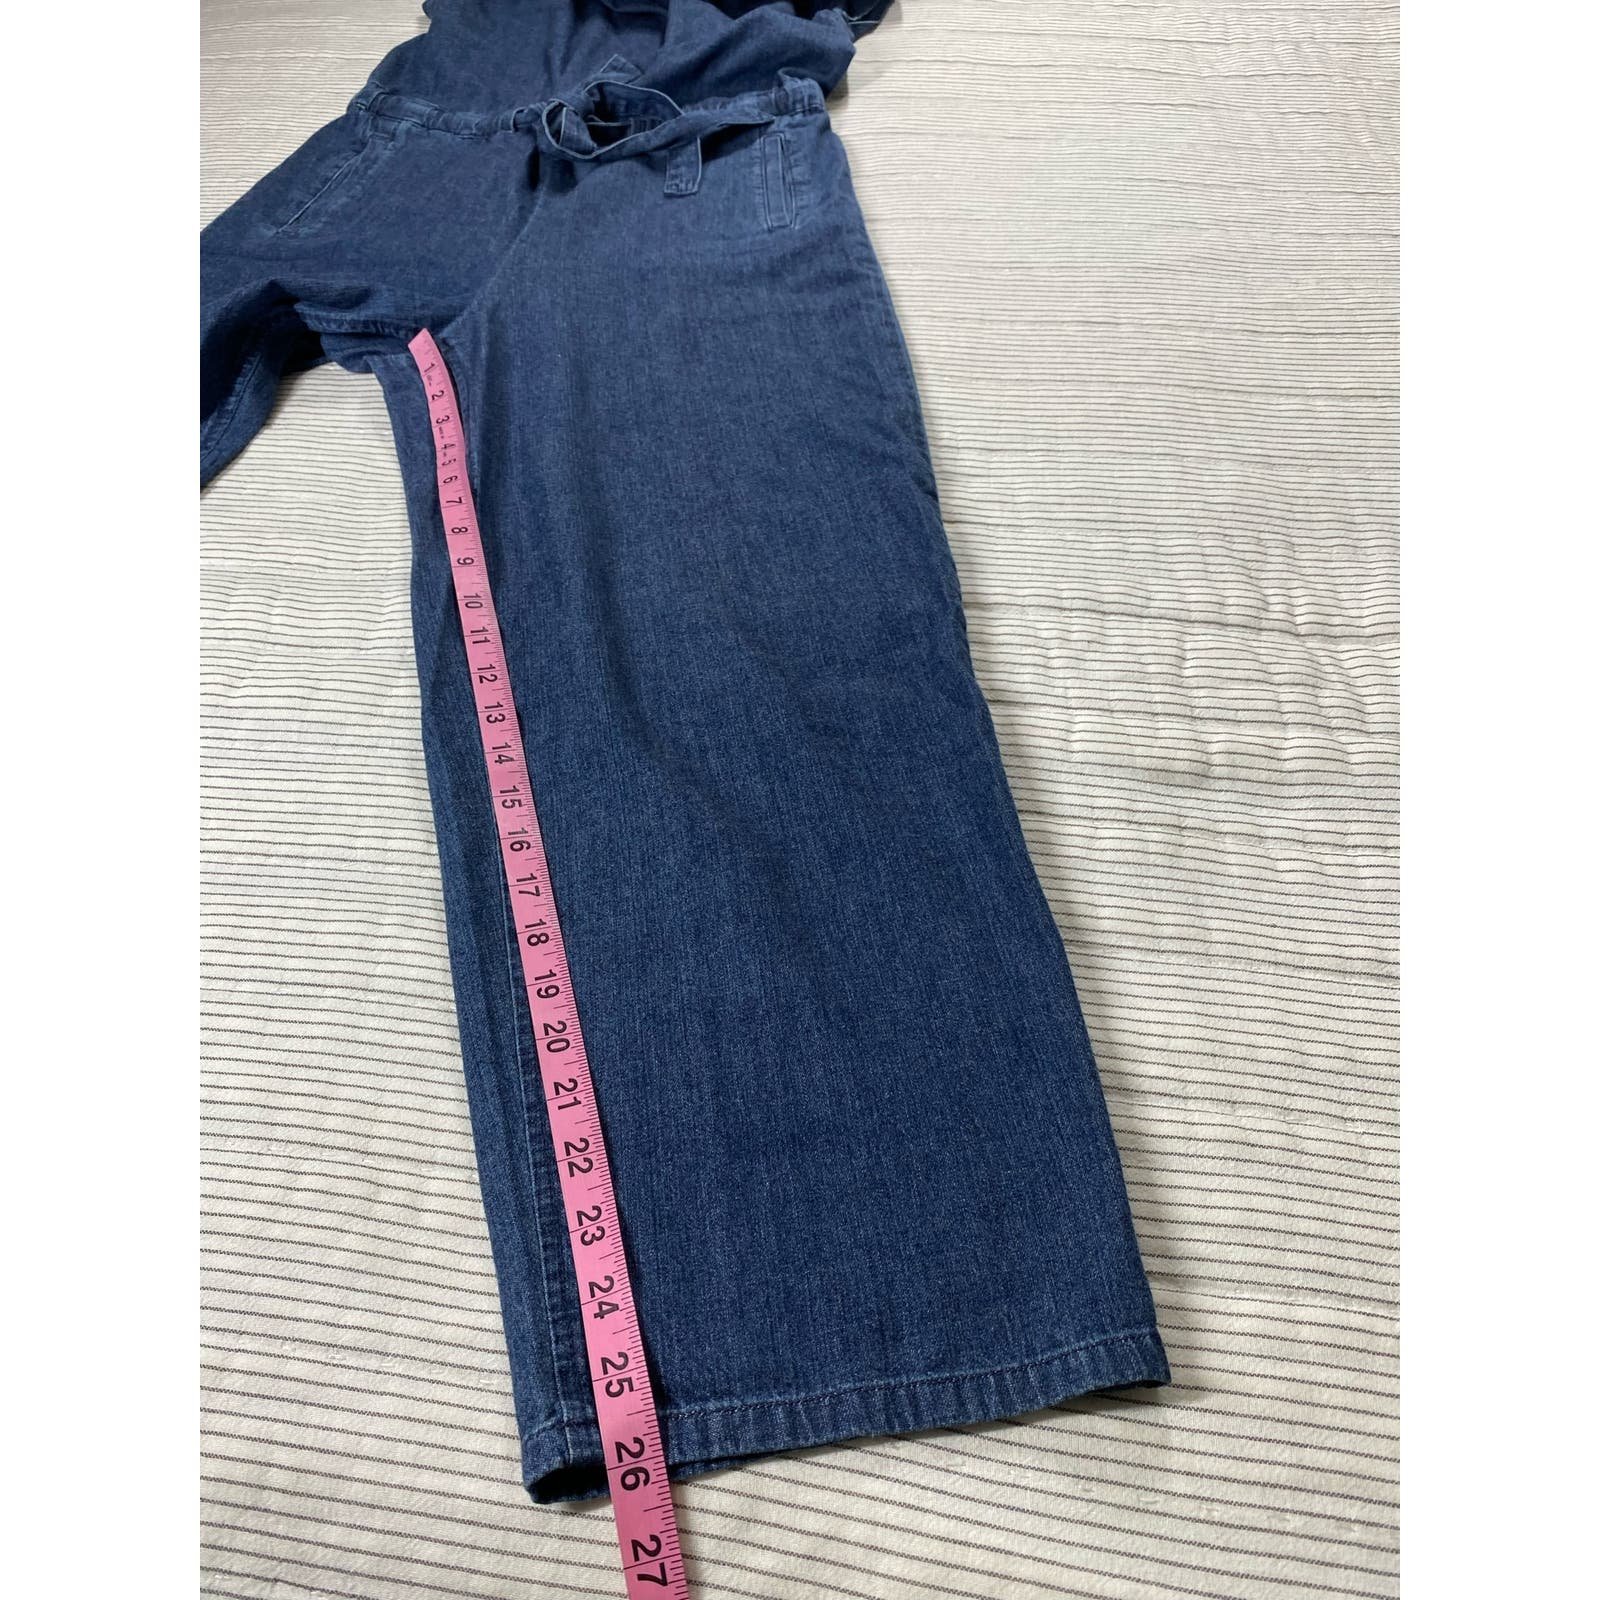 Fashion J. Crew Boatneck Jumpsuit In Chambray Denim Size 4 o1xU187e8 just buy it